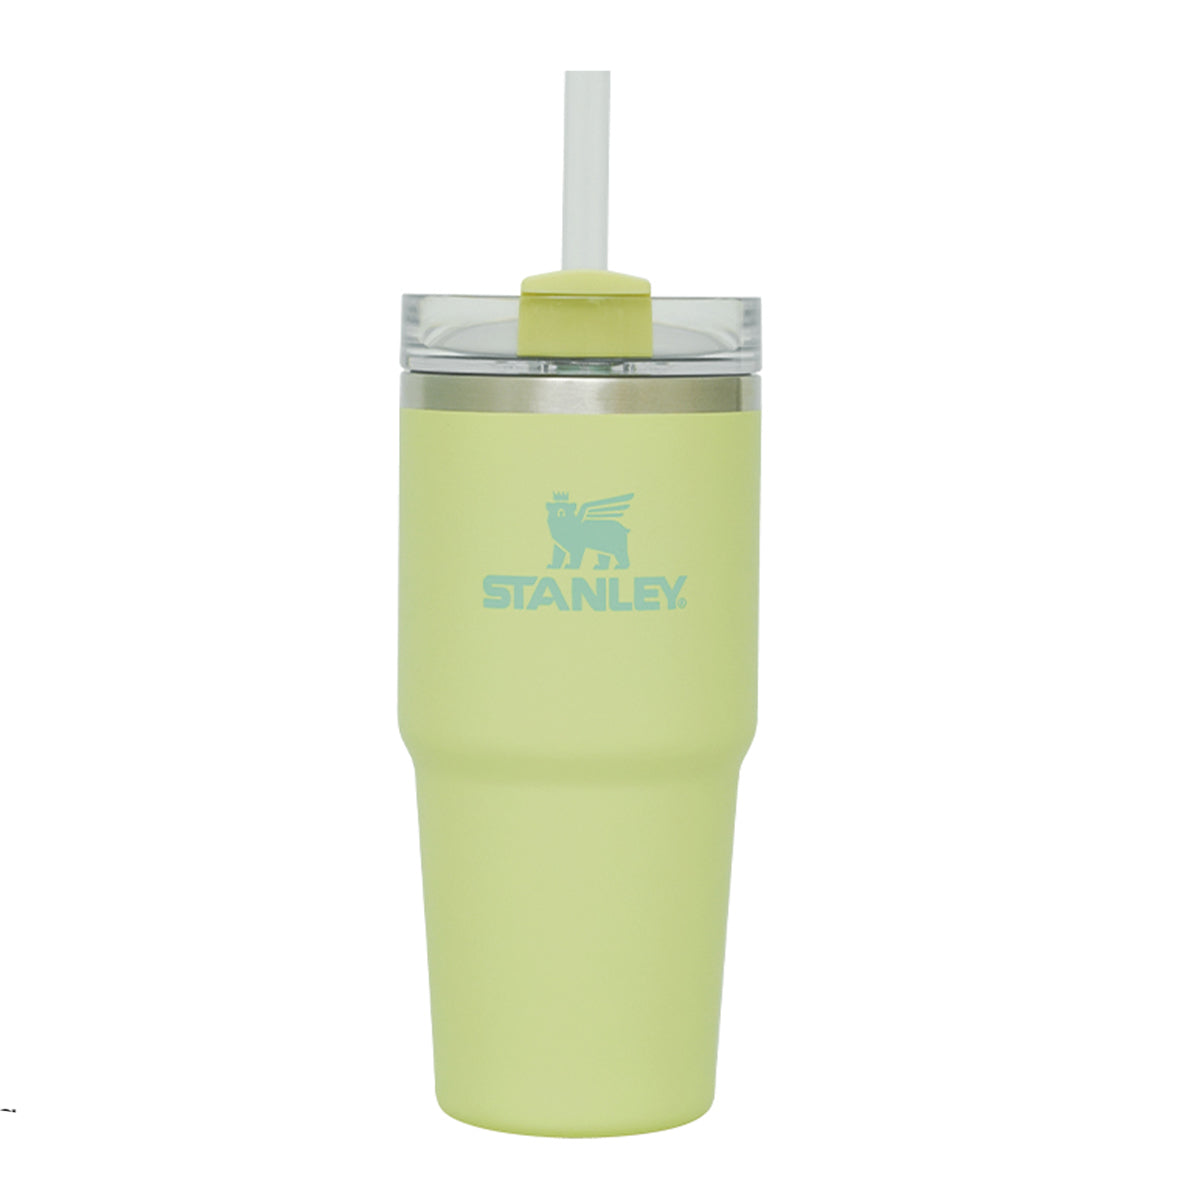 Yellow and Pink Stanley Tumbler 